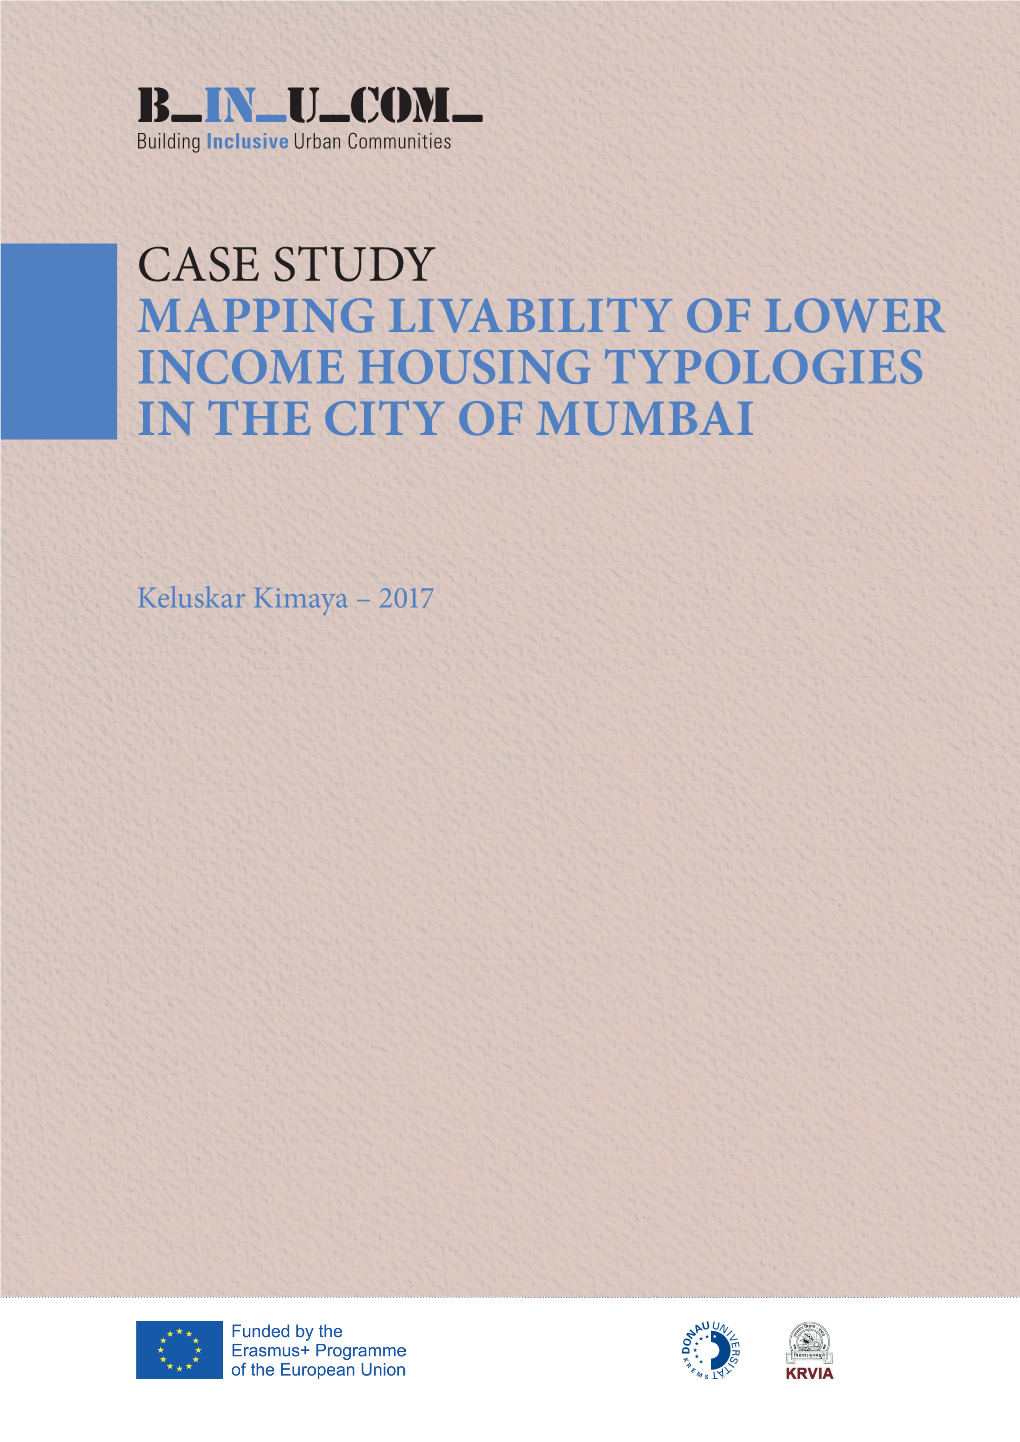 Case Study Mapping Livability of Lower Income Housing Typologies in the City of Mumbai